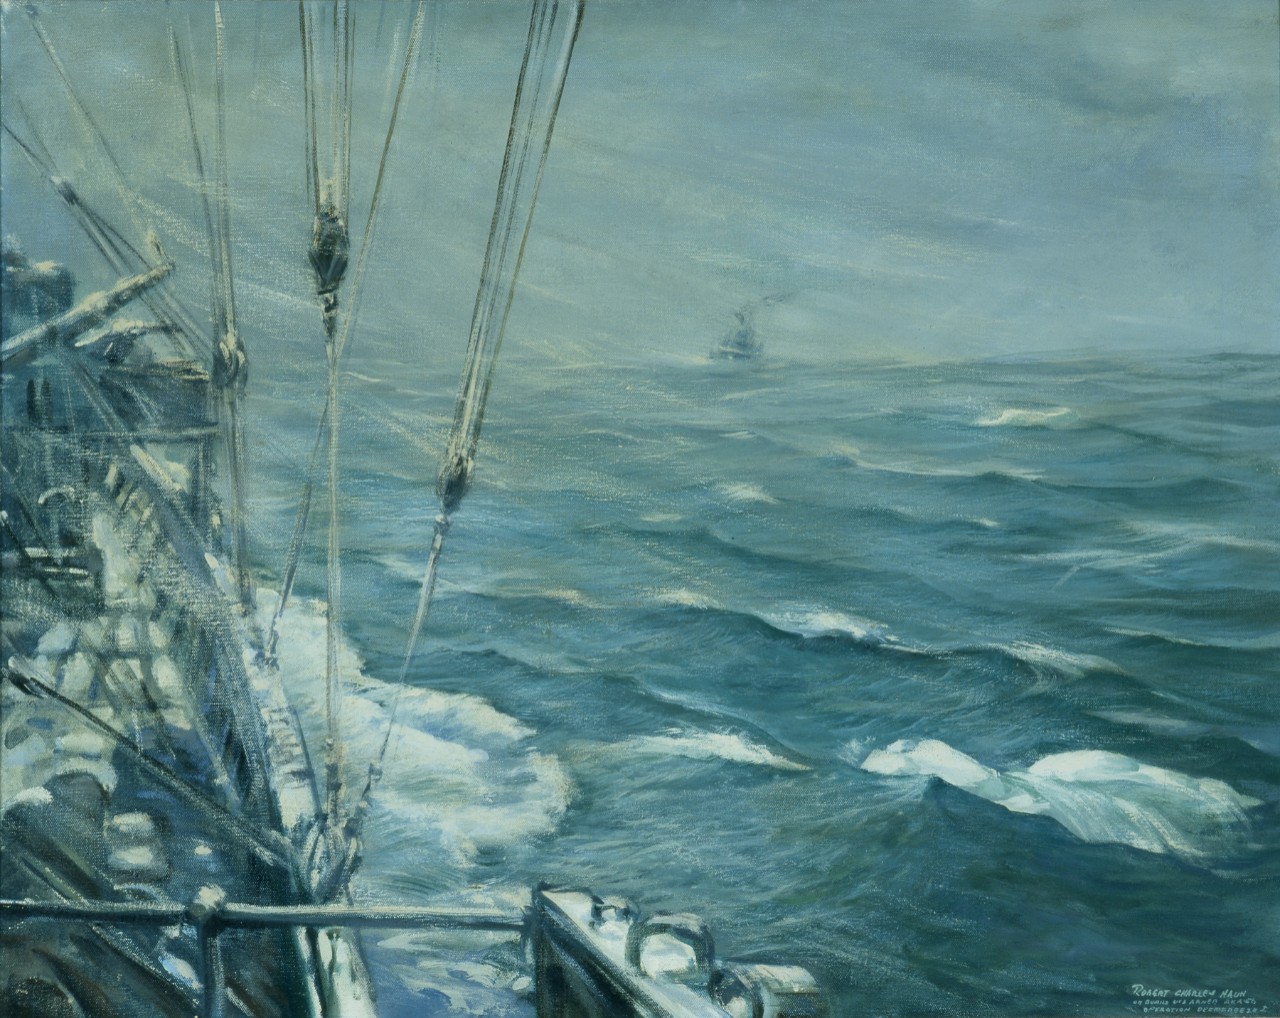 Rough seas seen from the deck of a ship